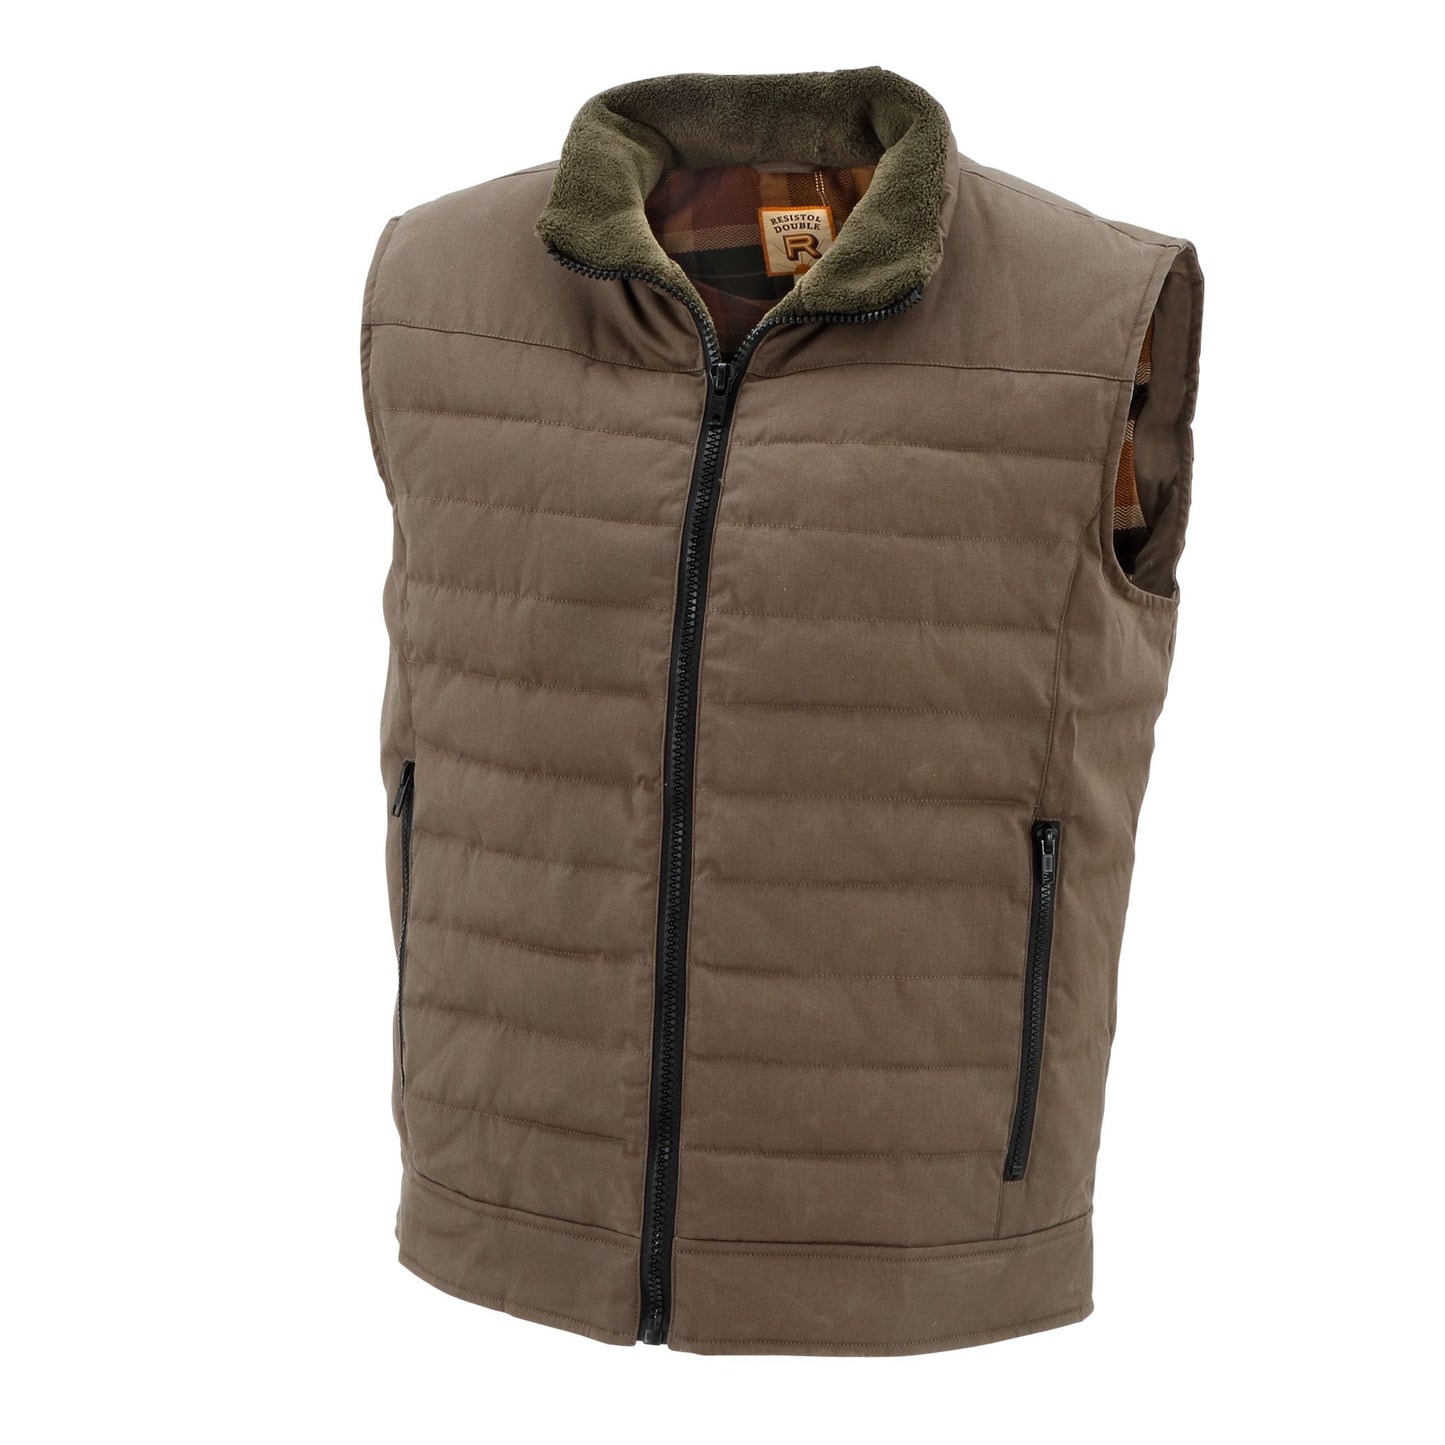 Resistol Double R Will Vest - Olive - R4F908-4751